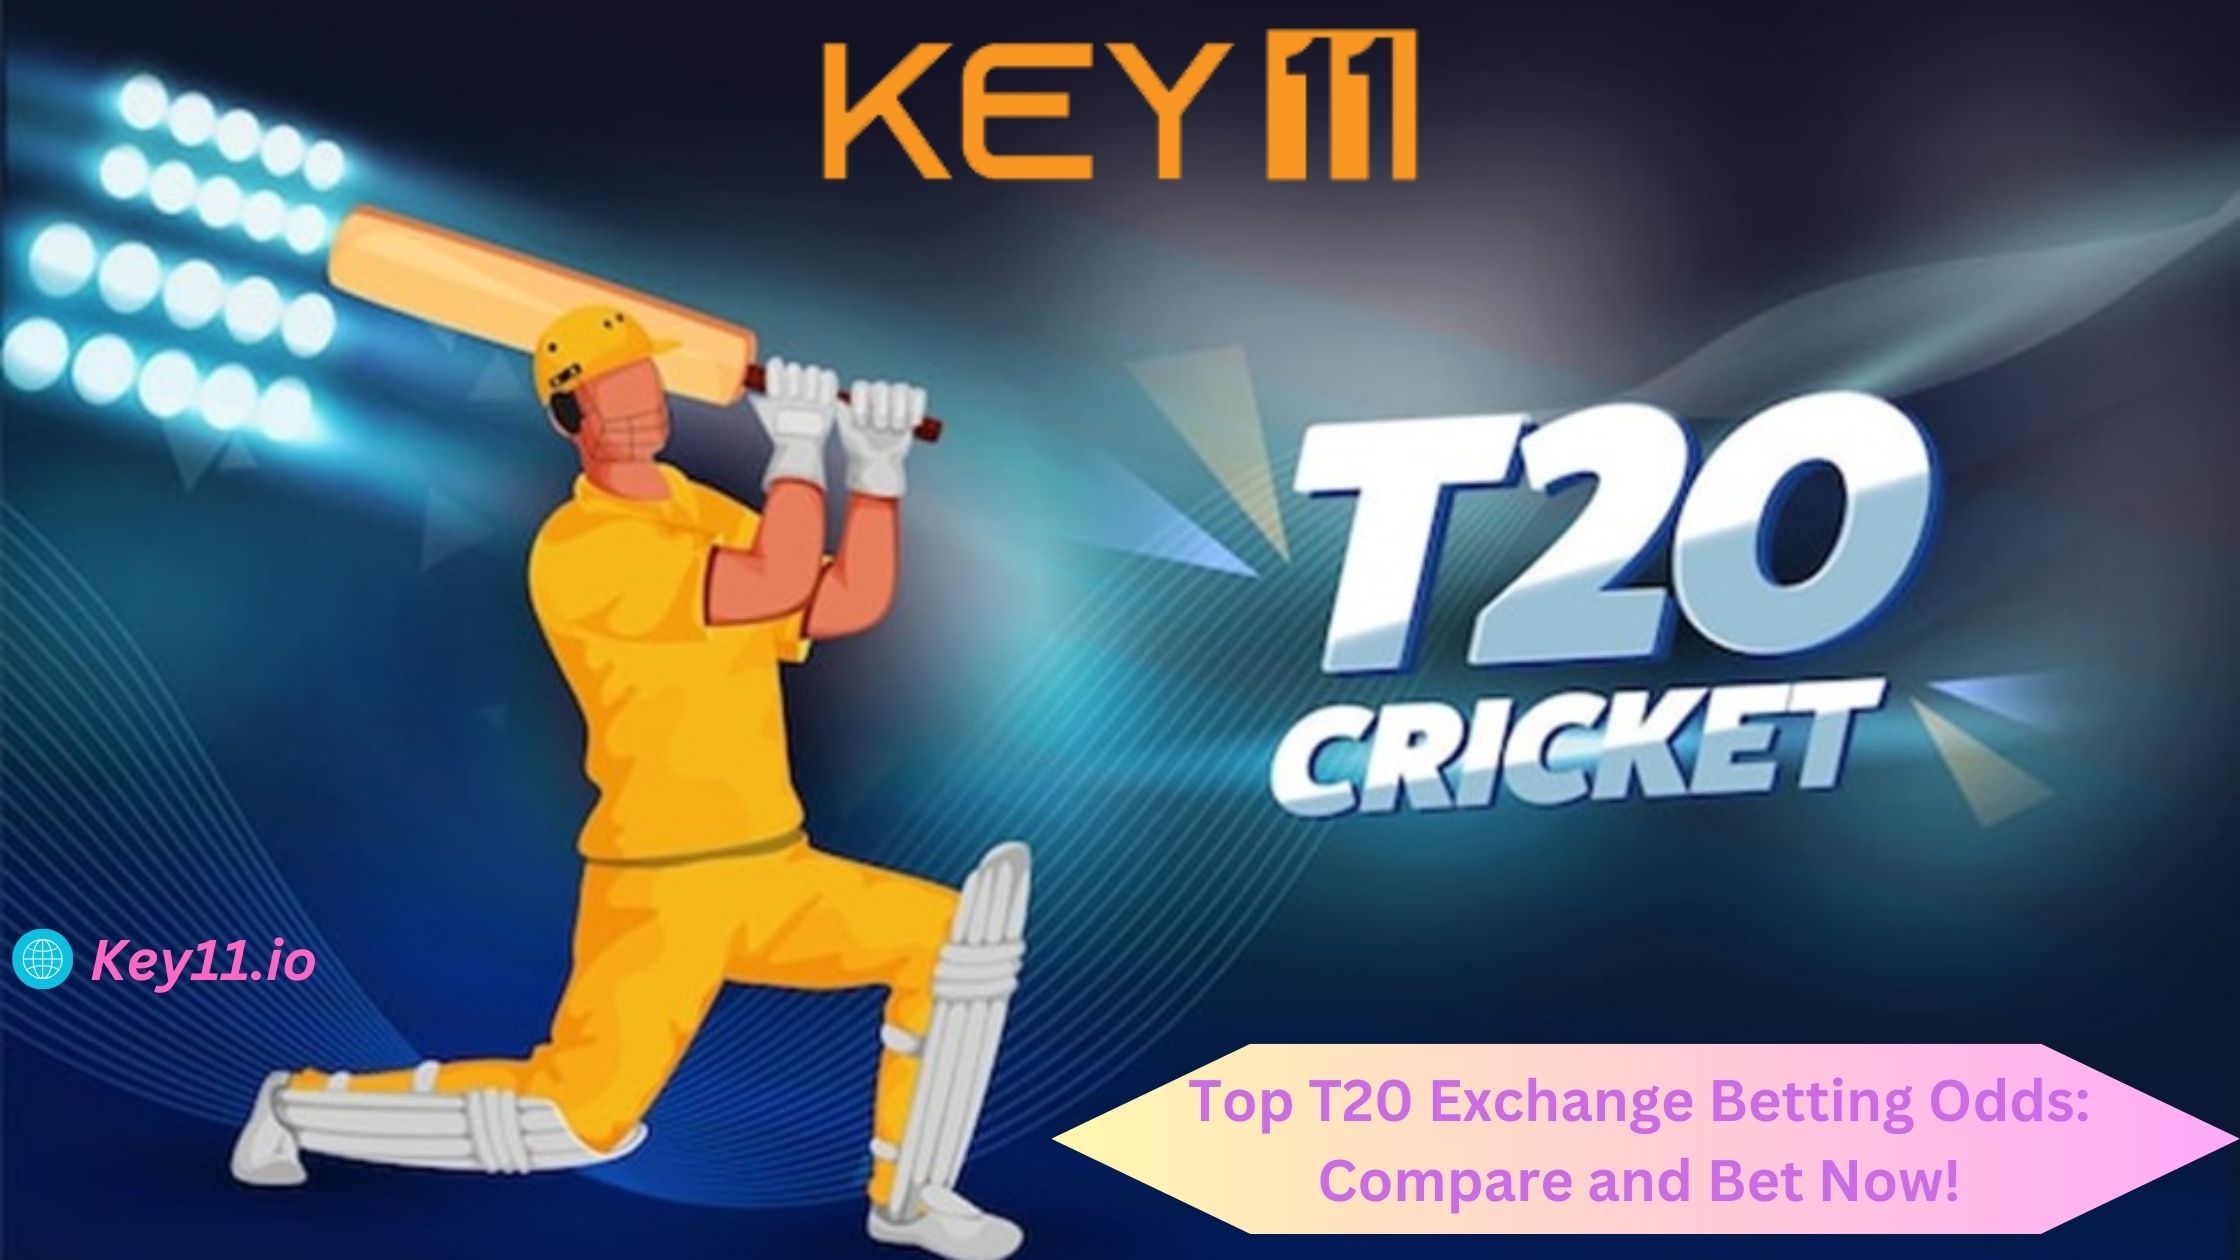 Top T20 Exchange Betting Odds: Compare and Bet Now! Key11